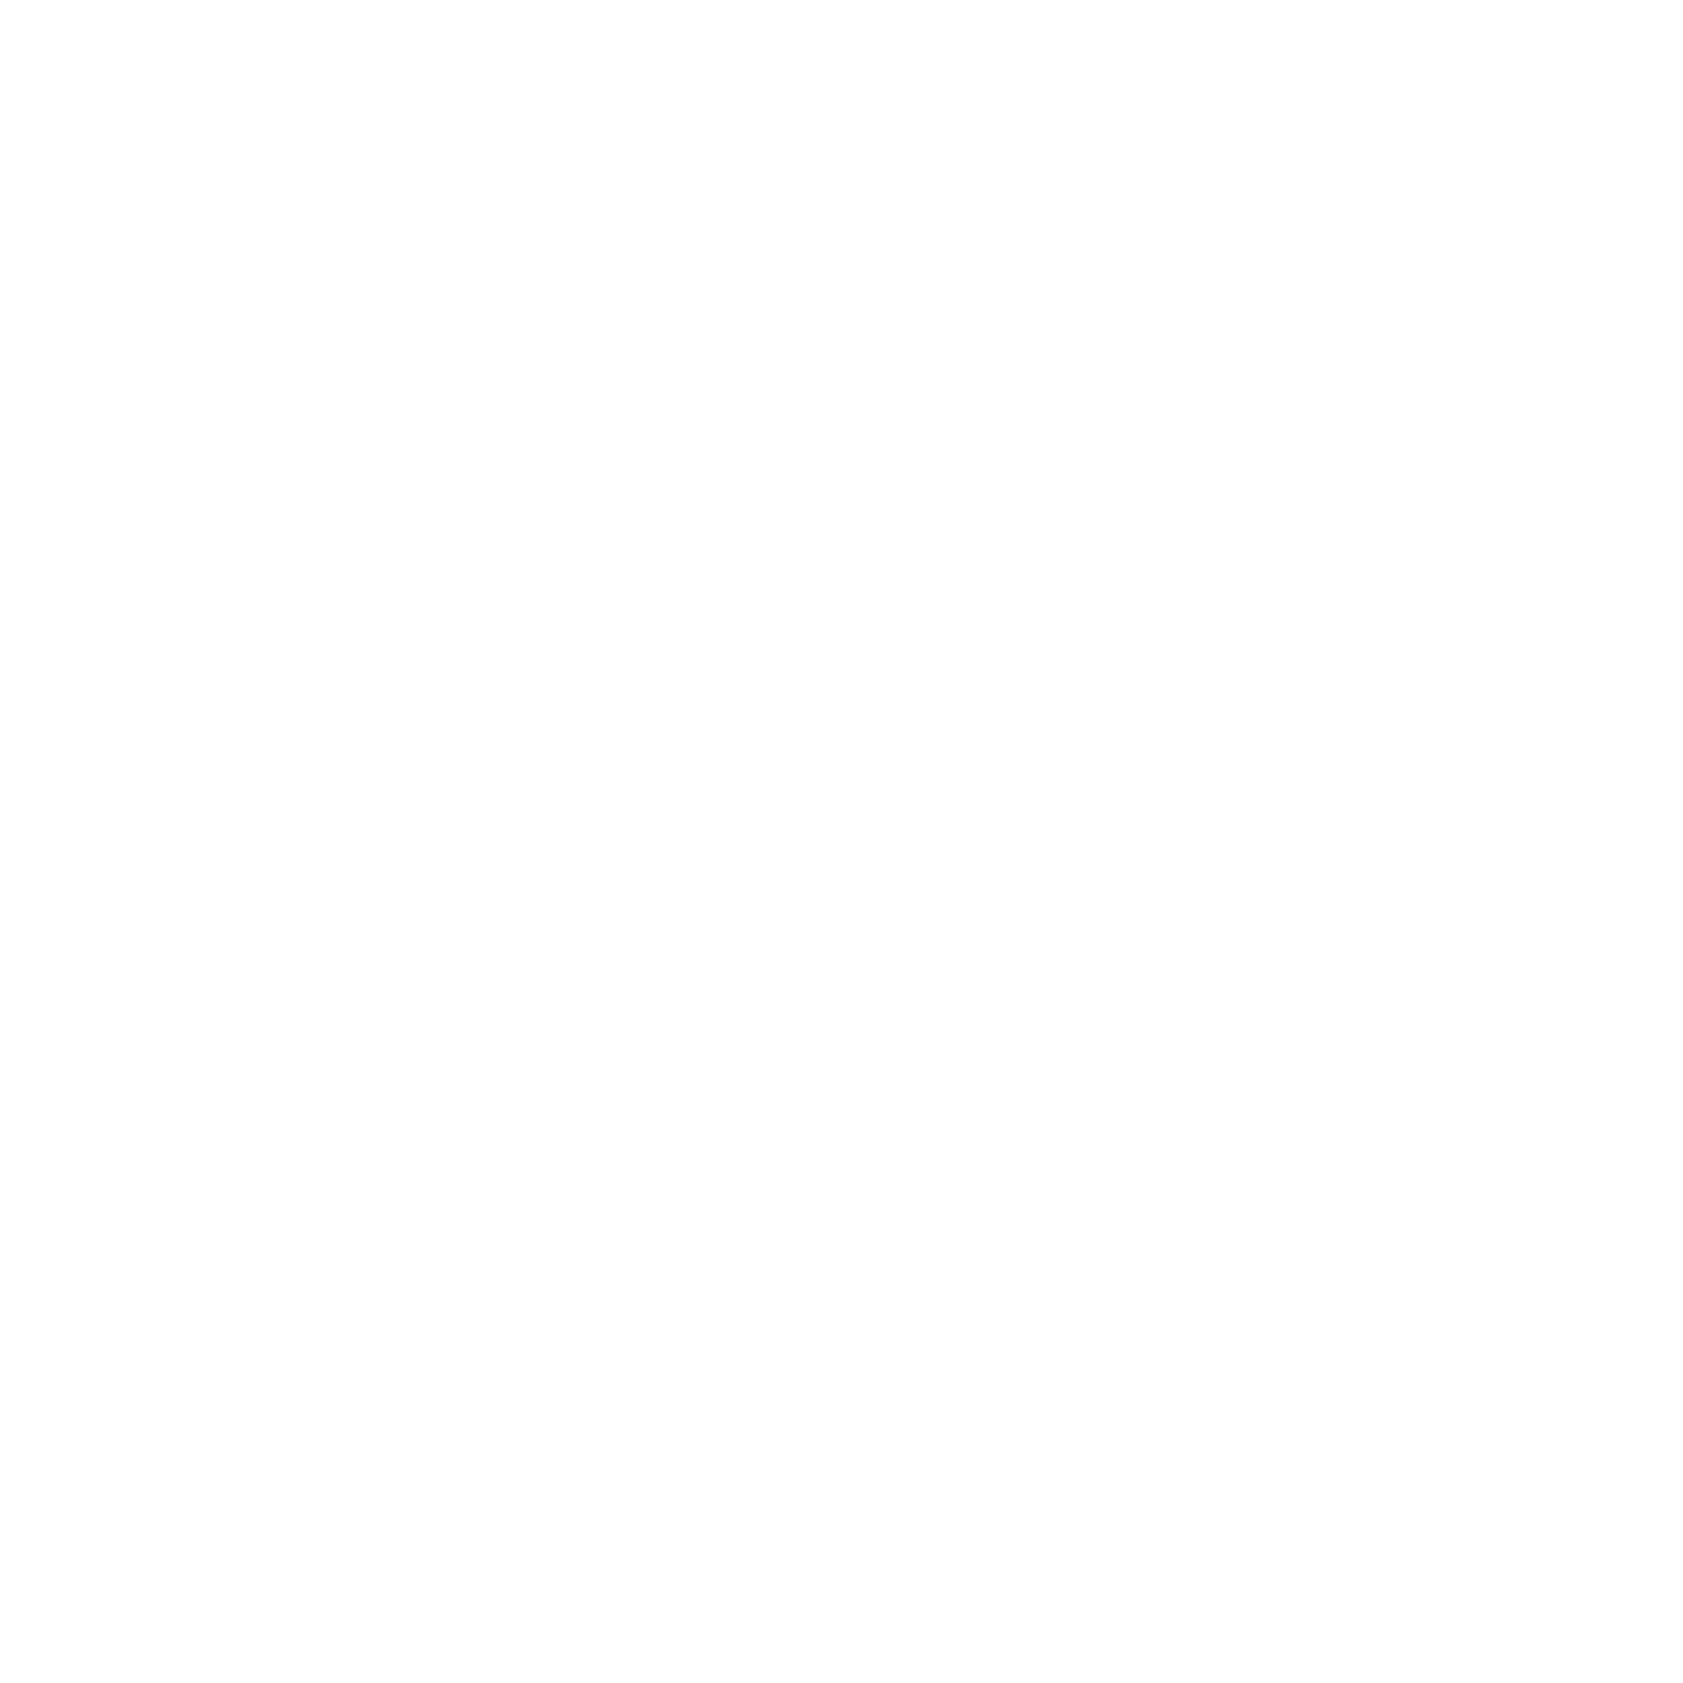 A pie chart section showing that 10% of the sales made from the Futue Heritage Fund go towards cultural initiatives.